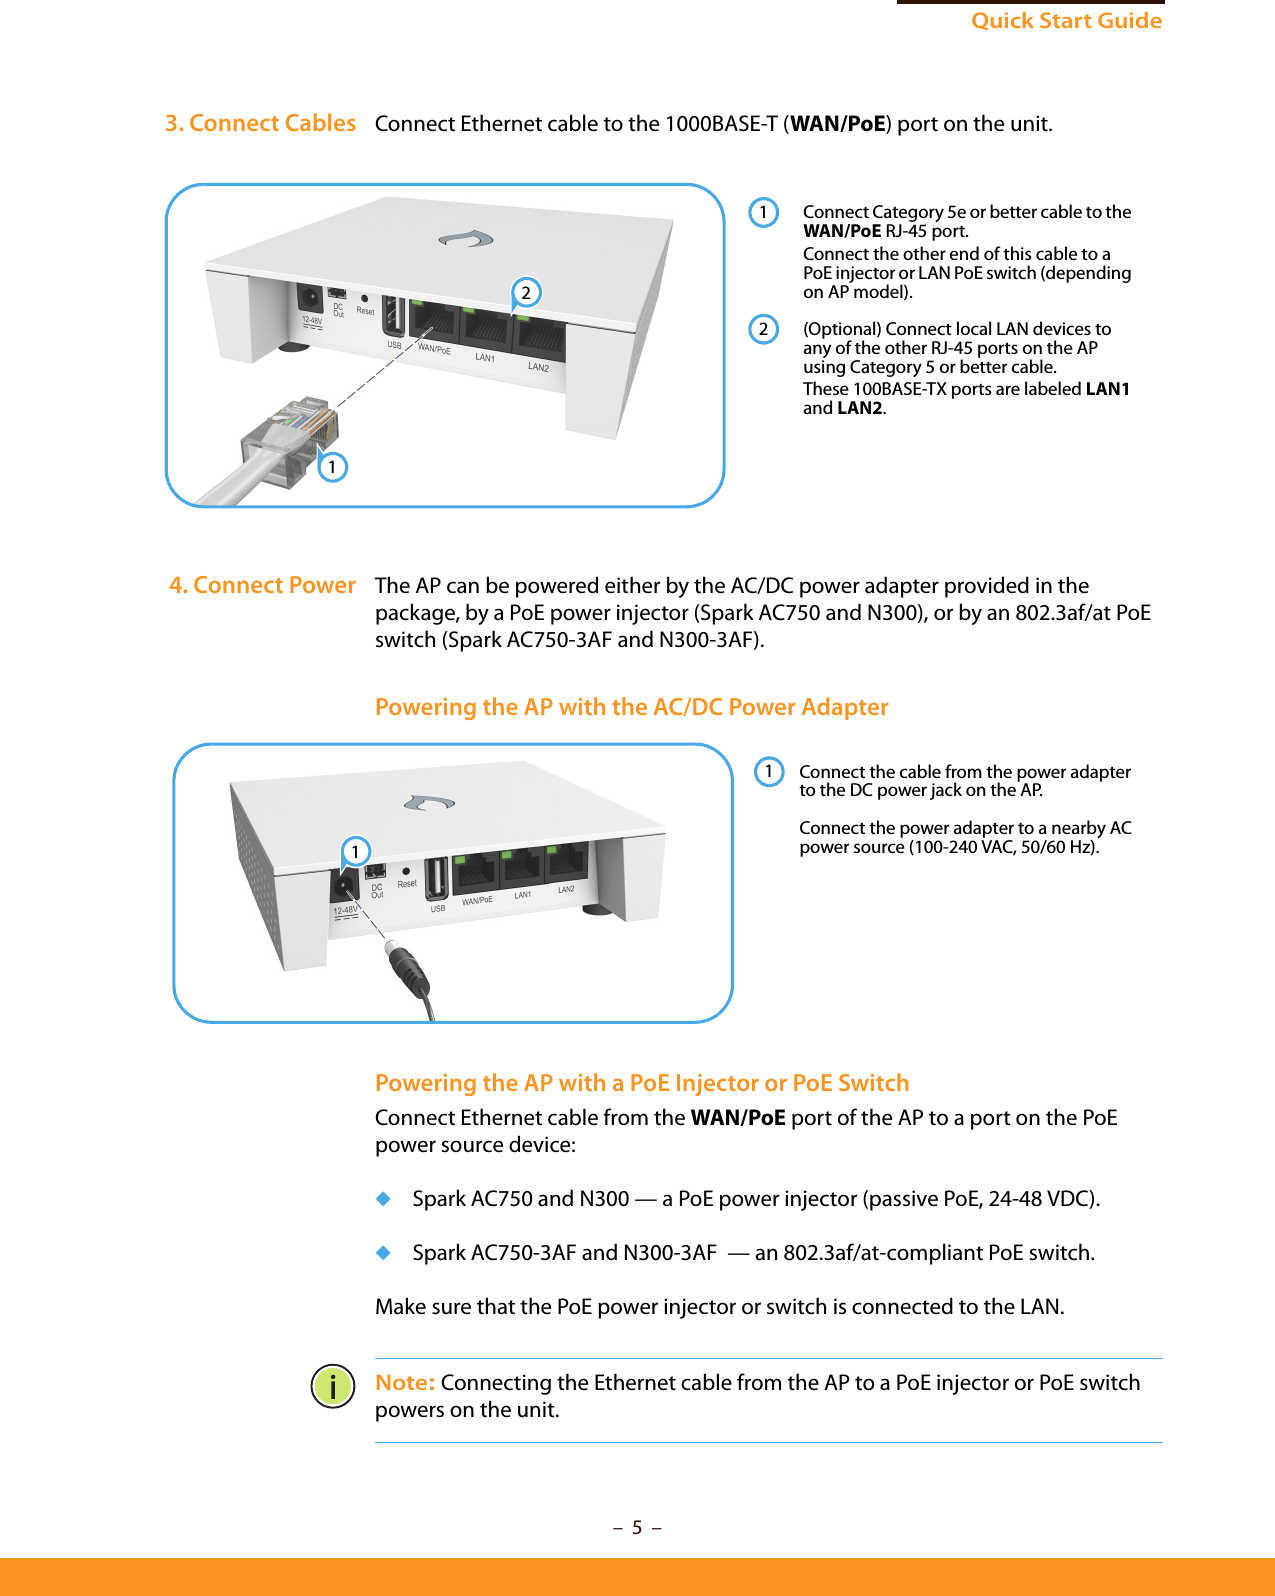 –  5  –Quick Start Guide3. Connect Cables Connect Ethernet cable to the 1000BASE-T (WAN/PoE) port on the unit.4. Connect Power The AP can be powered either by the AC/DC power adapter provided in the package, by a PoE power injector (Spark AC750 and N300), or by an 802.3af/at PoE switch (Spark AC750-3AF and N300-3AF).Powering the AP with the AC/DC Power AdapterPowering the AP with a PoE Injector or PoE SwitchConnect Ethernet cable from the WAN/PoE port of the AP to a port on the PoE power source device:◆Spark AC750 and N300 — a PoE power injector (passive PoE, 24-48 VDC).◆Spark AC750-3AF and N300-3AF  — an 802.3af/at-compliant PoE switch.Make sure that the PoE power injector or switch is connected to the LAN.Note: Connecting the Ethernet cable from the AP to a PoE injector or PoE switch powers on the unit. Connect Category 5e or better cable to the WAN/PoE RJ-45 port.Connect the other end of this cable to a PoE injector or LAN PoE switch (depending on AP model).(Optional) Connect local LAN devices to any of the other RJ-45 ports on the AP using Category 5 or better cable.These 100BASE-TX ports are labeled LAN1 and LAN2.1212 Connect the cable from the power adapter to the DC power jack on the AP.Connect the power adapter to a nearby AC power source (100-240 VAC, 50/60 Hz).11